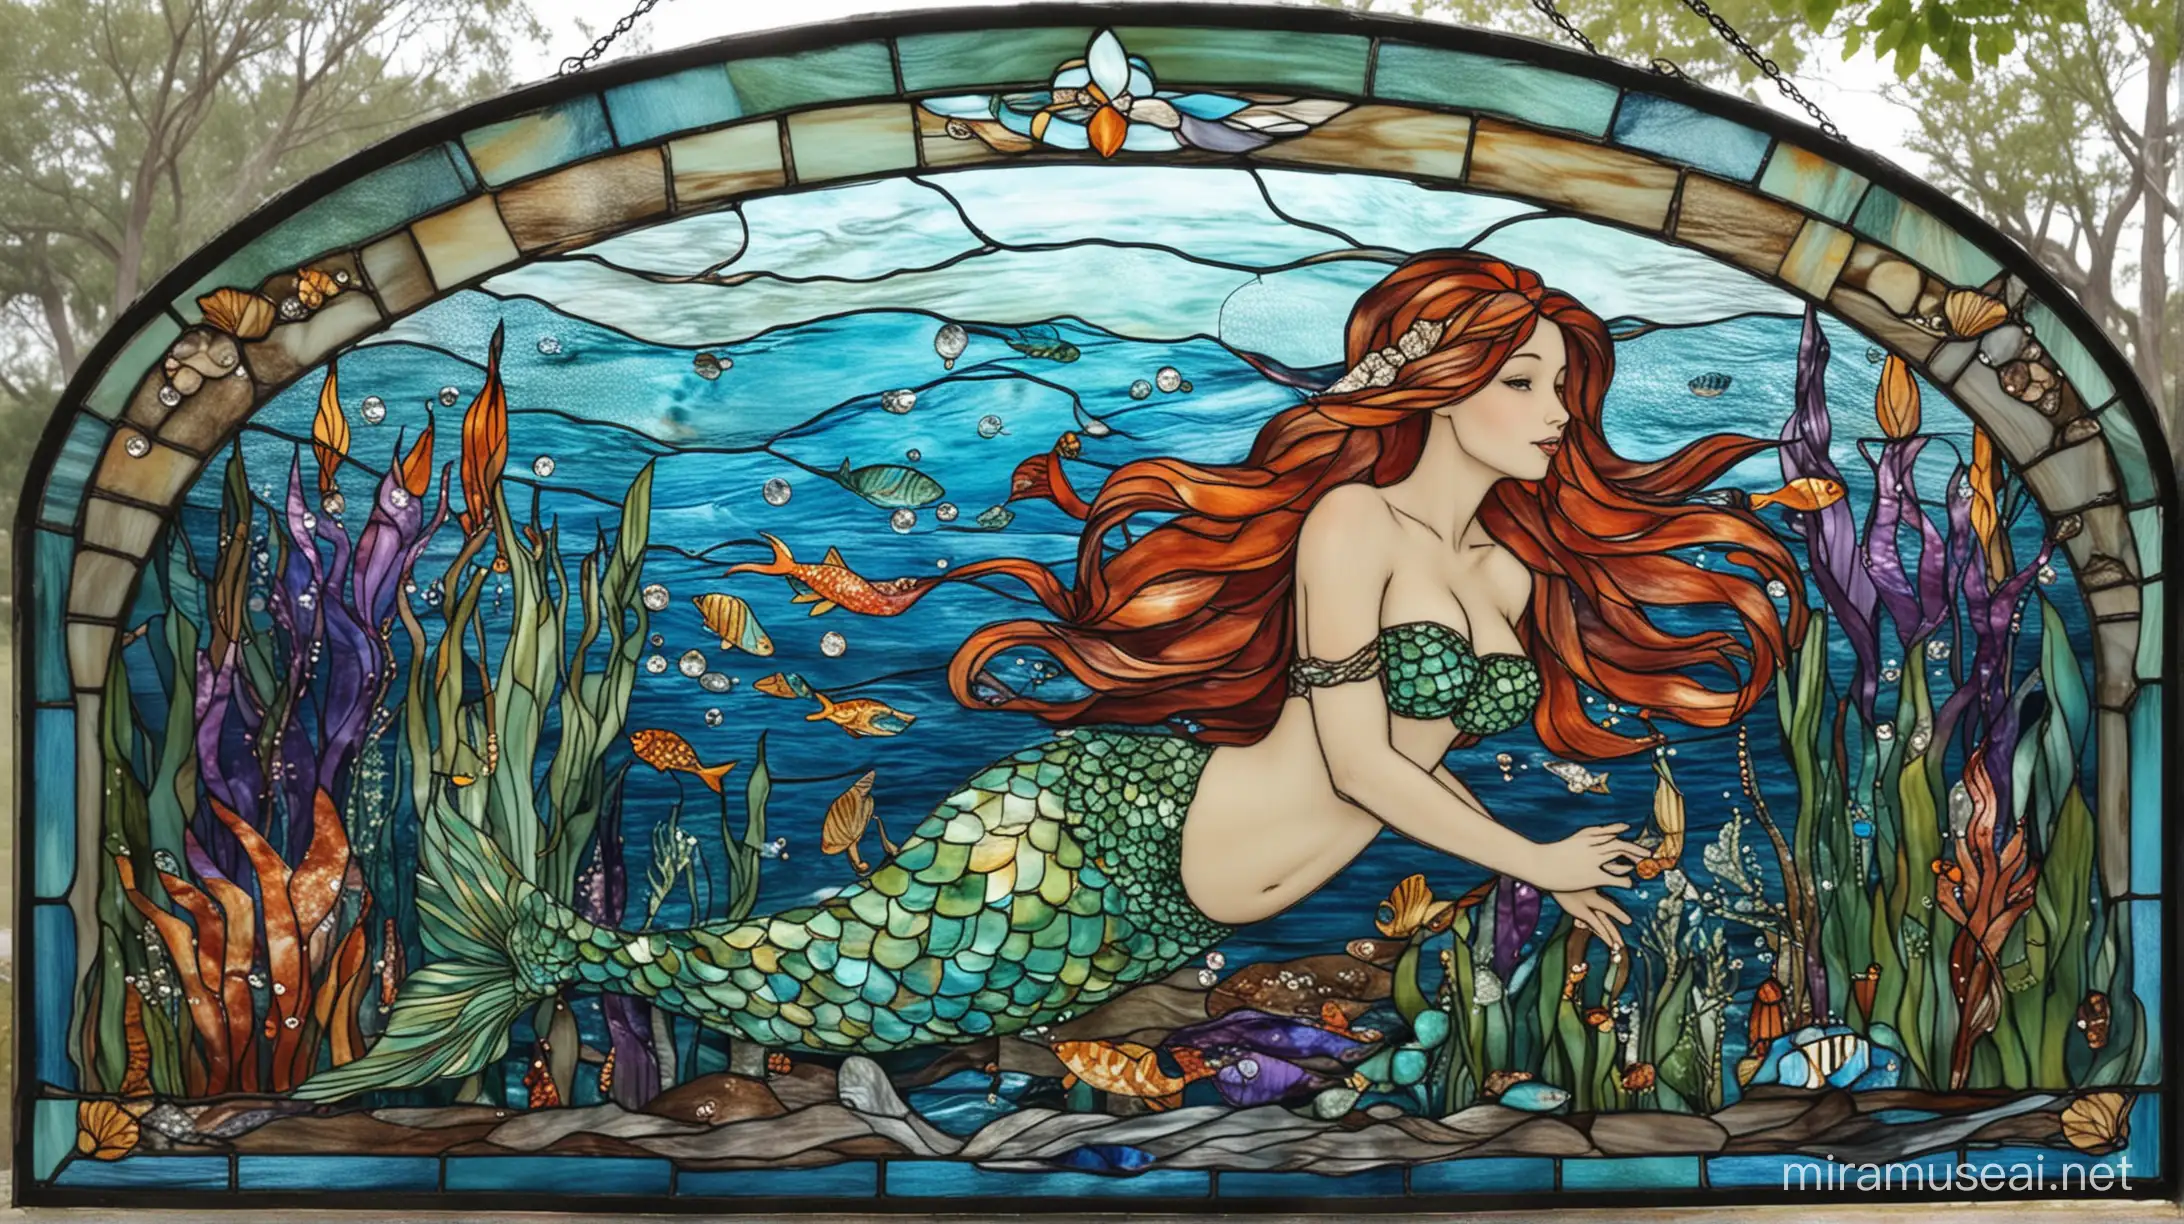 Colorful Mermaid Stained Glass Artwork